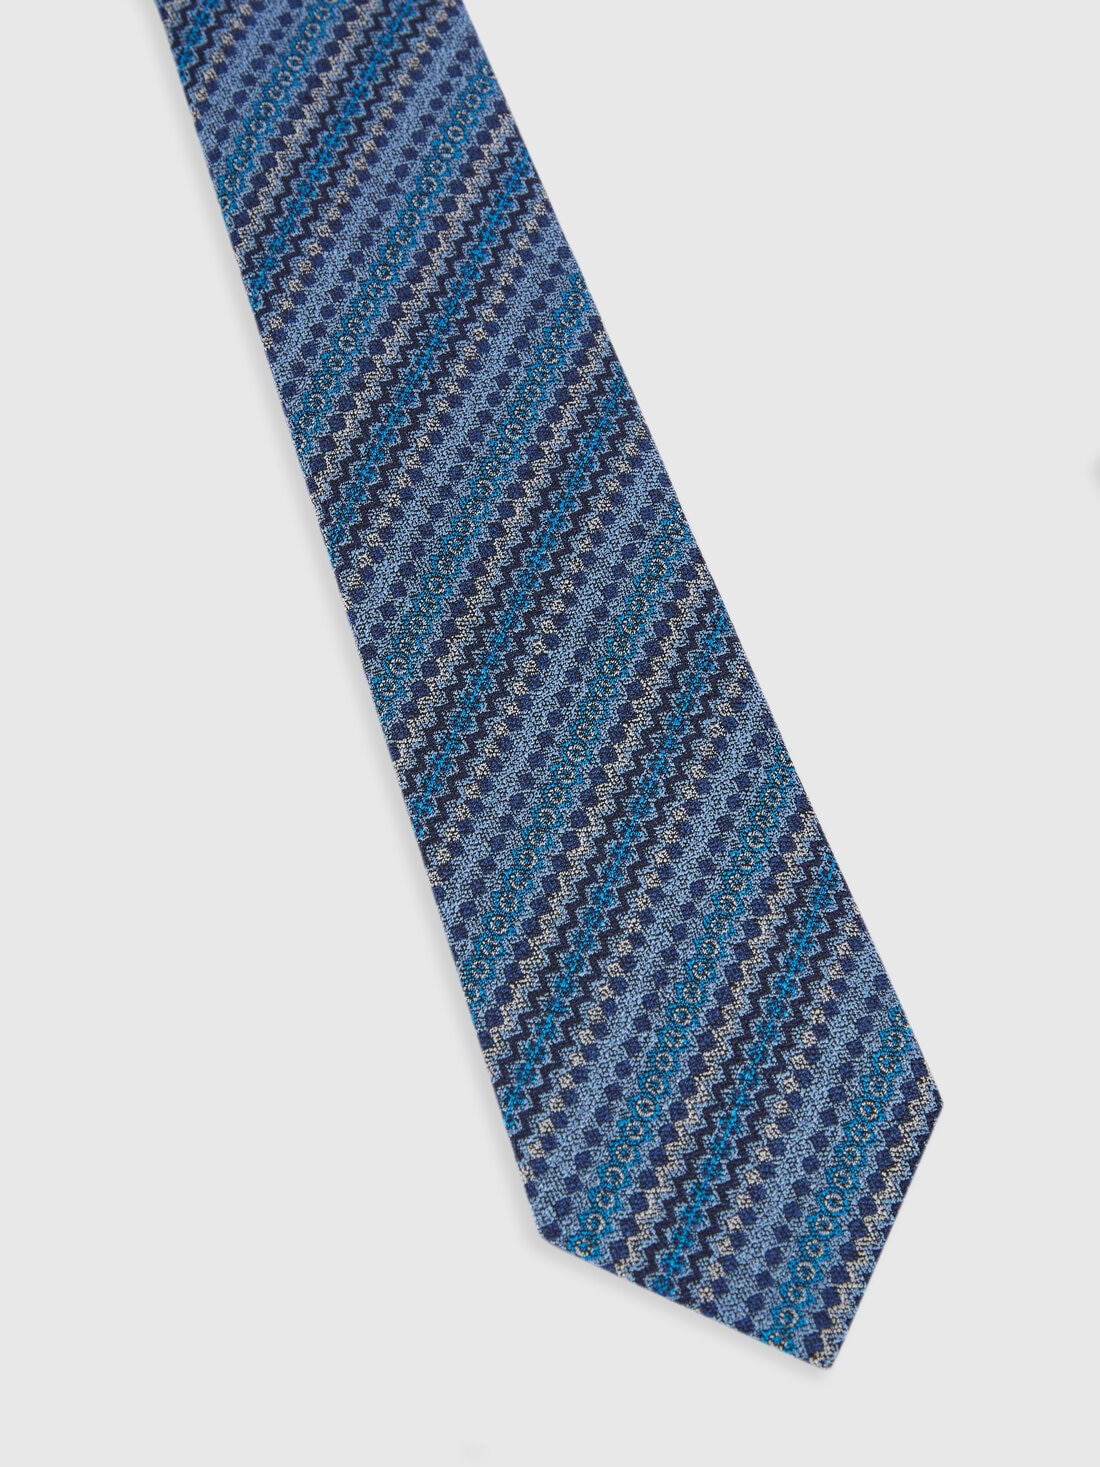 Silk tie knitted with multiple techniques , Multicoloured  - 8053147141893 - 1